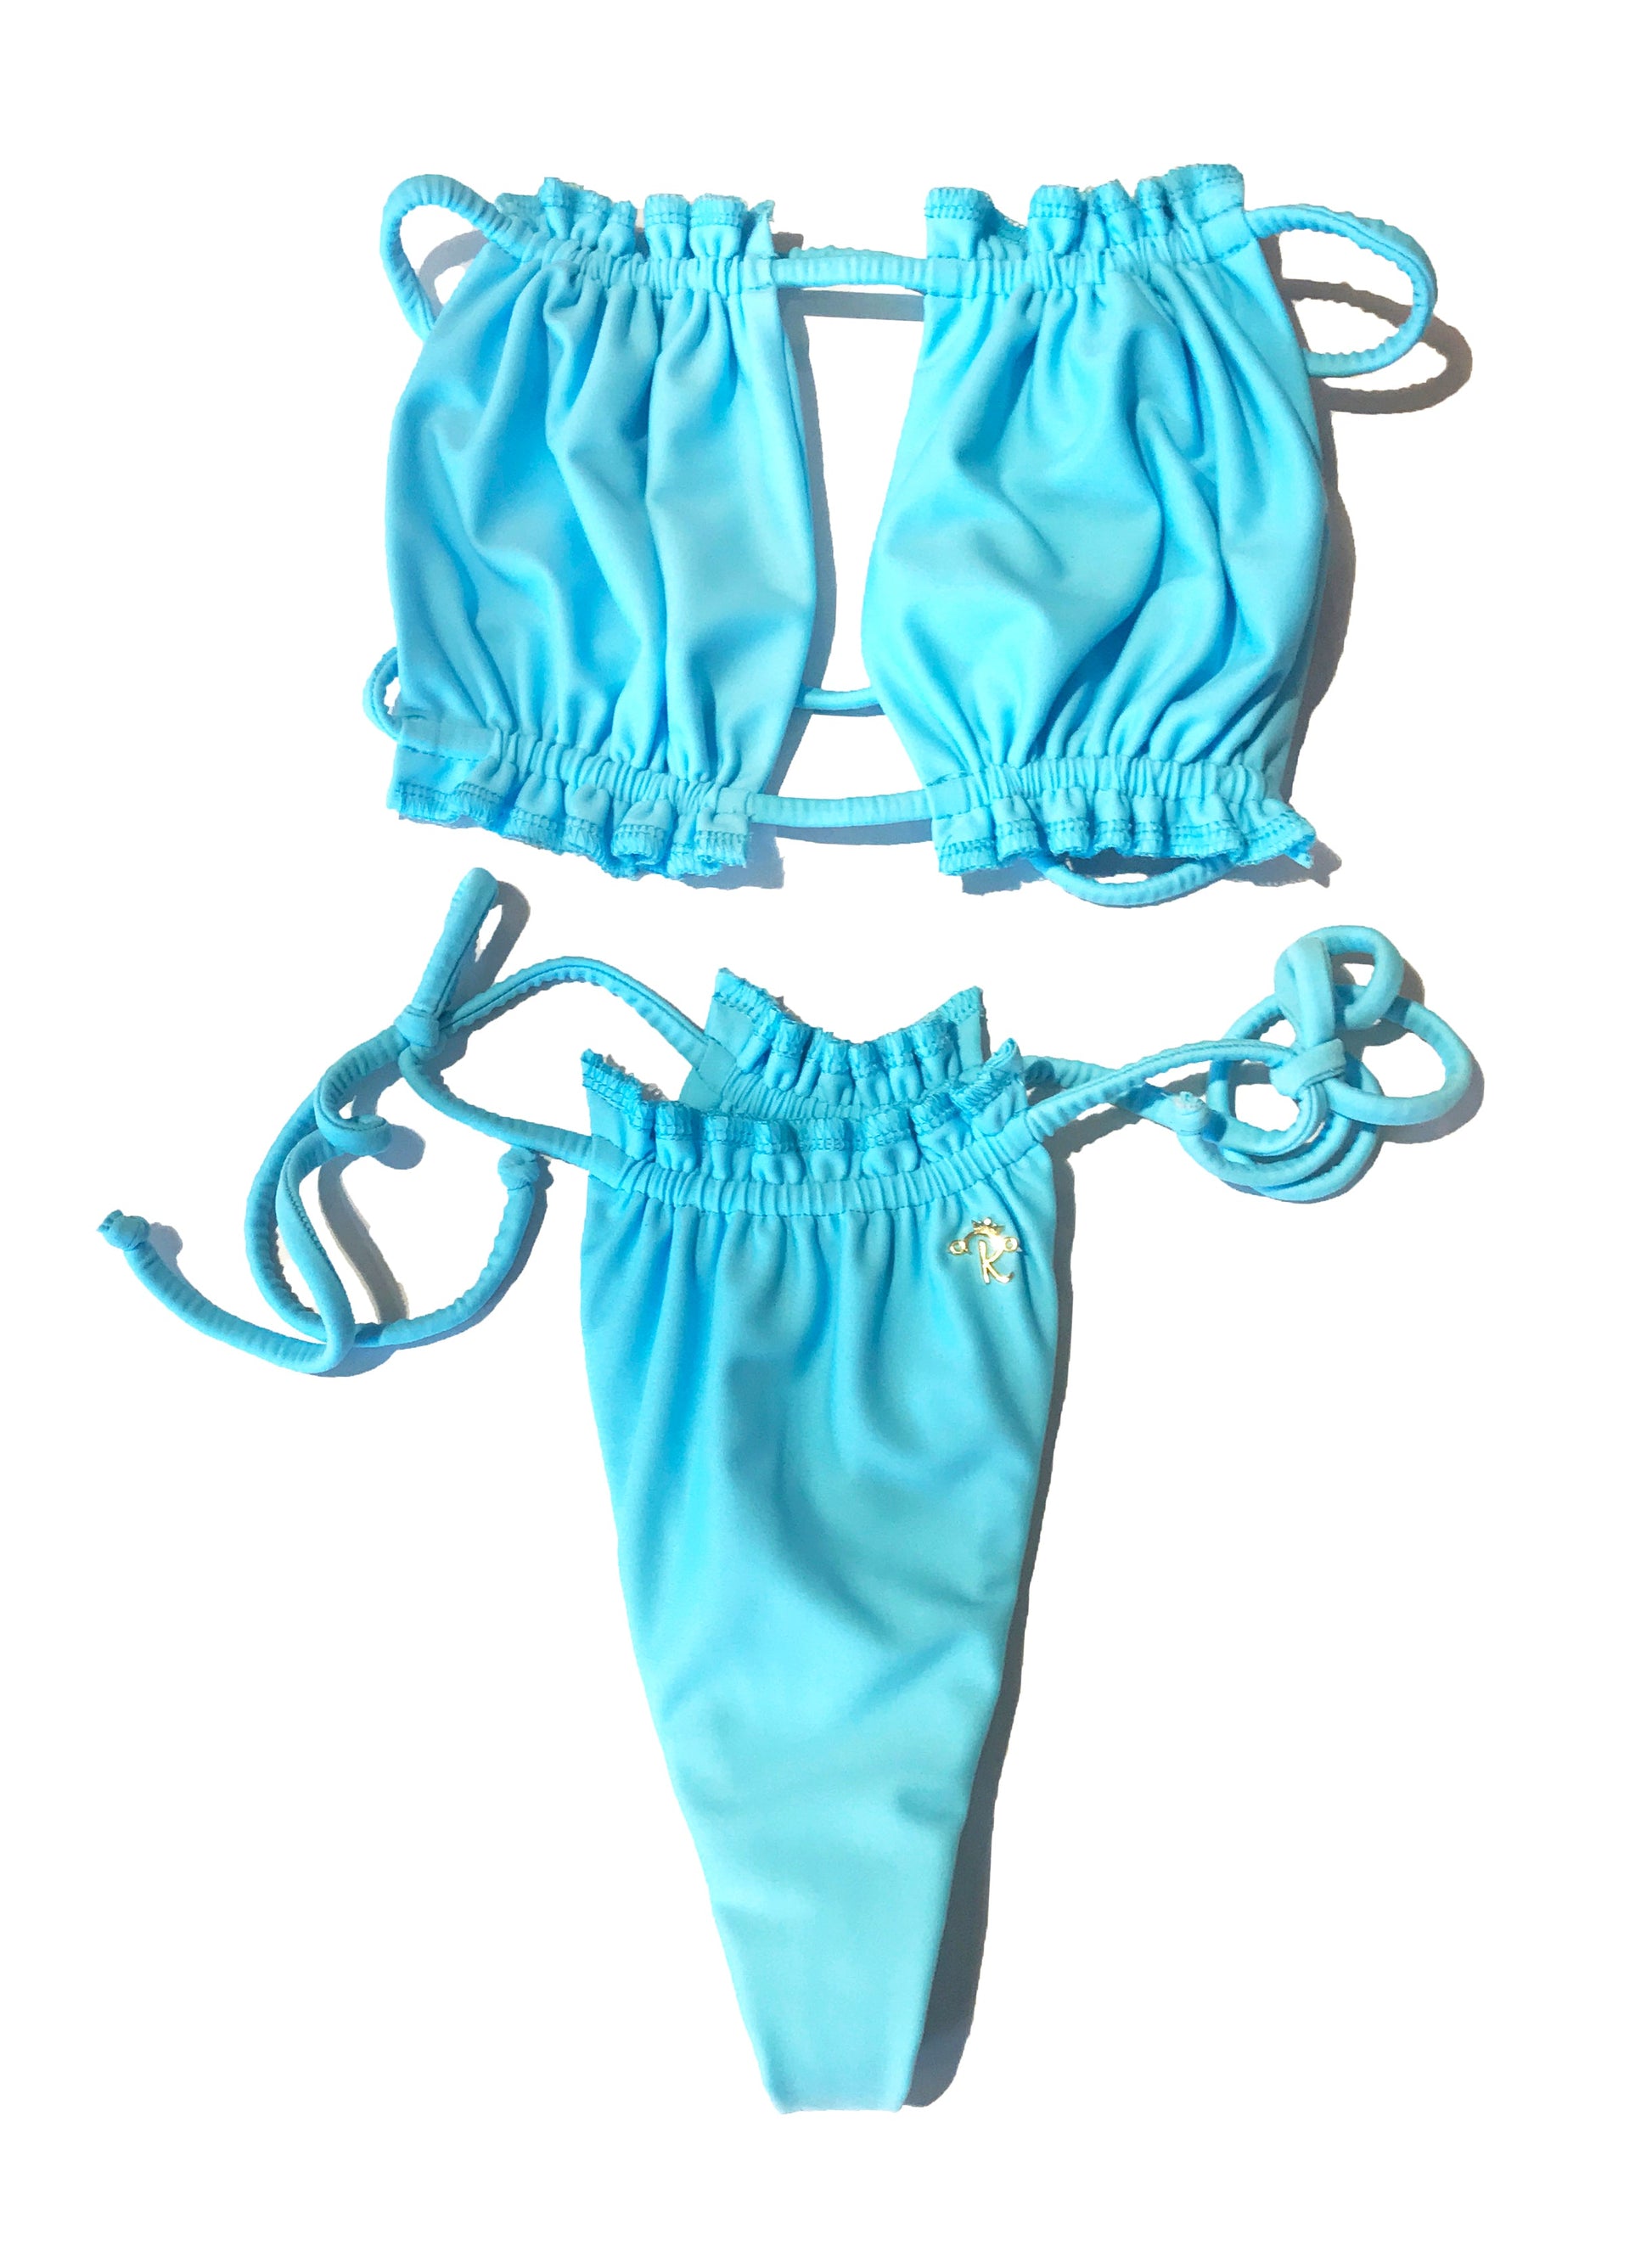 Candy Bandeau Top & Thong Bottom - Baby Blue-7